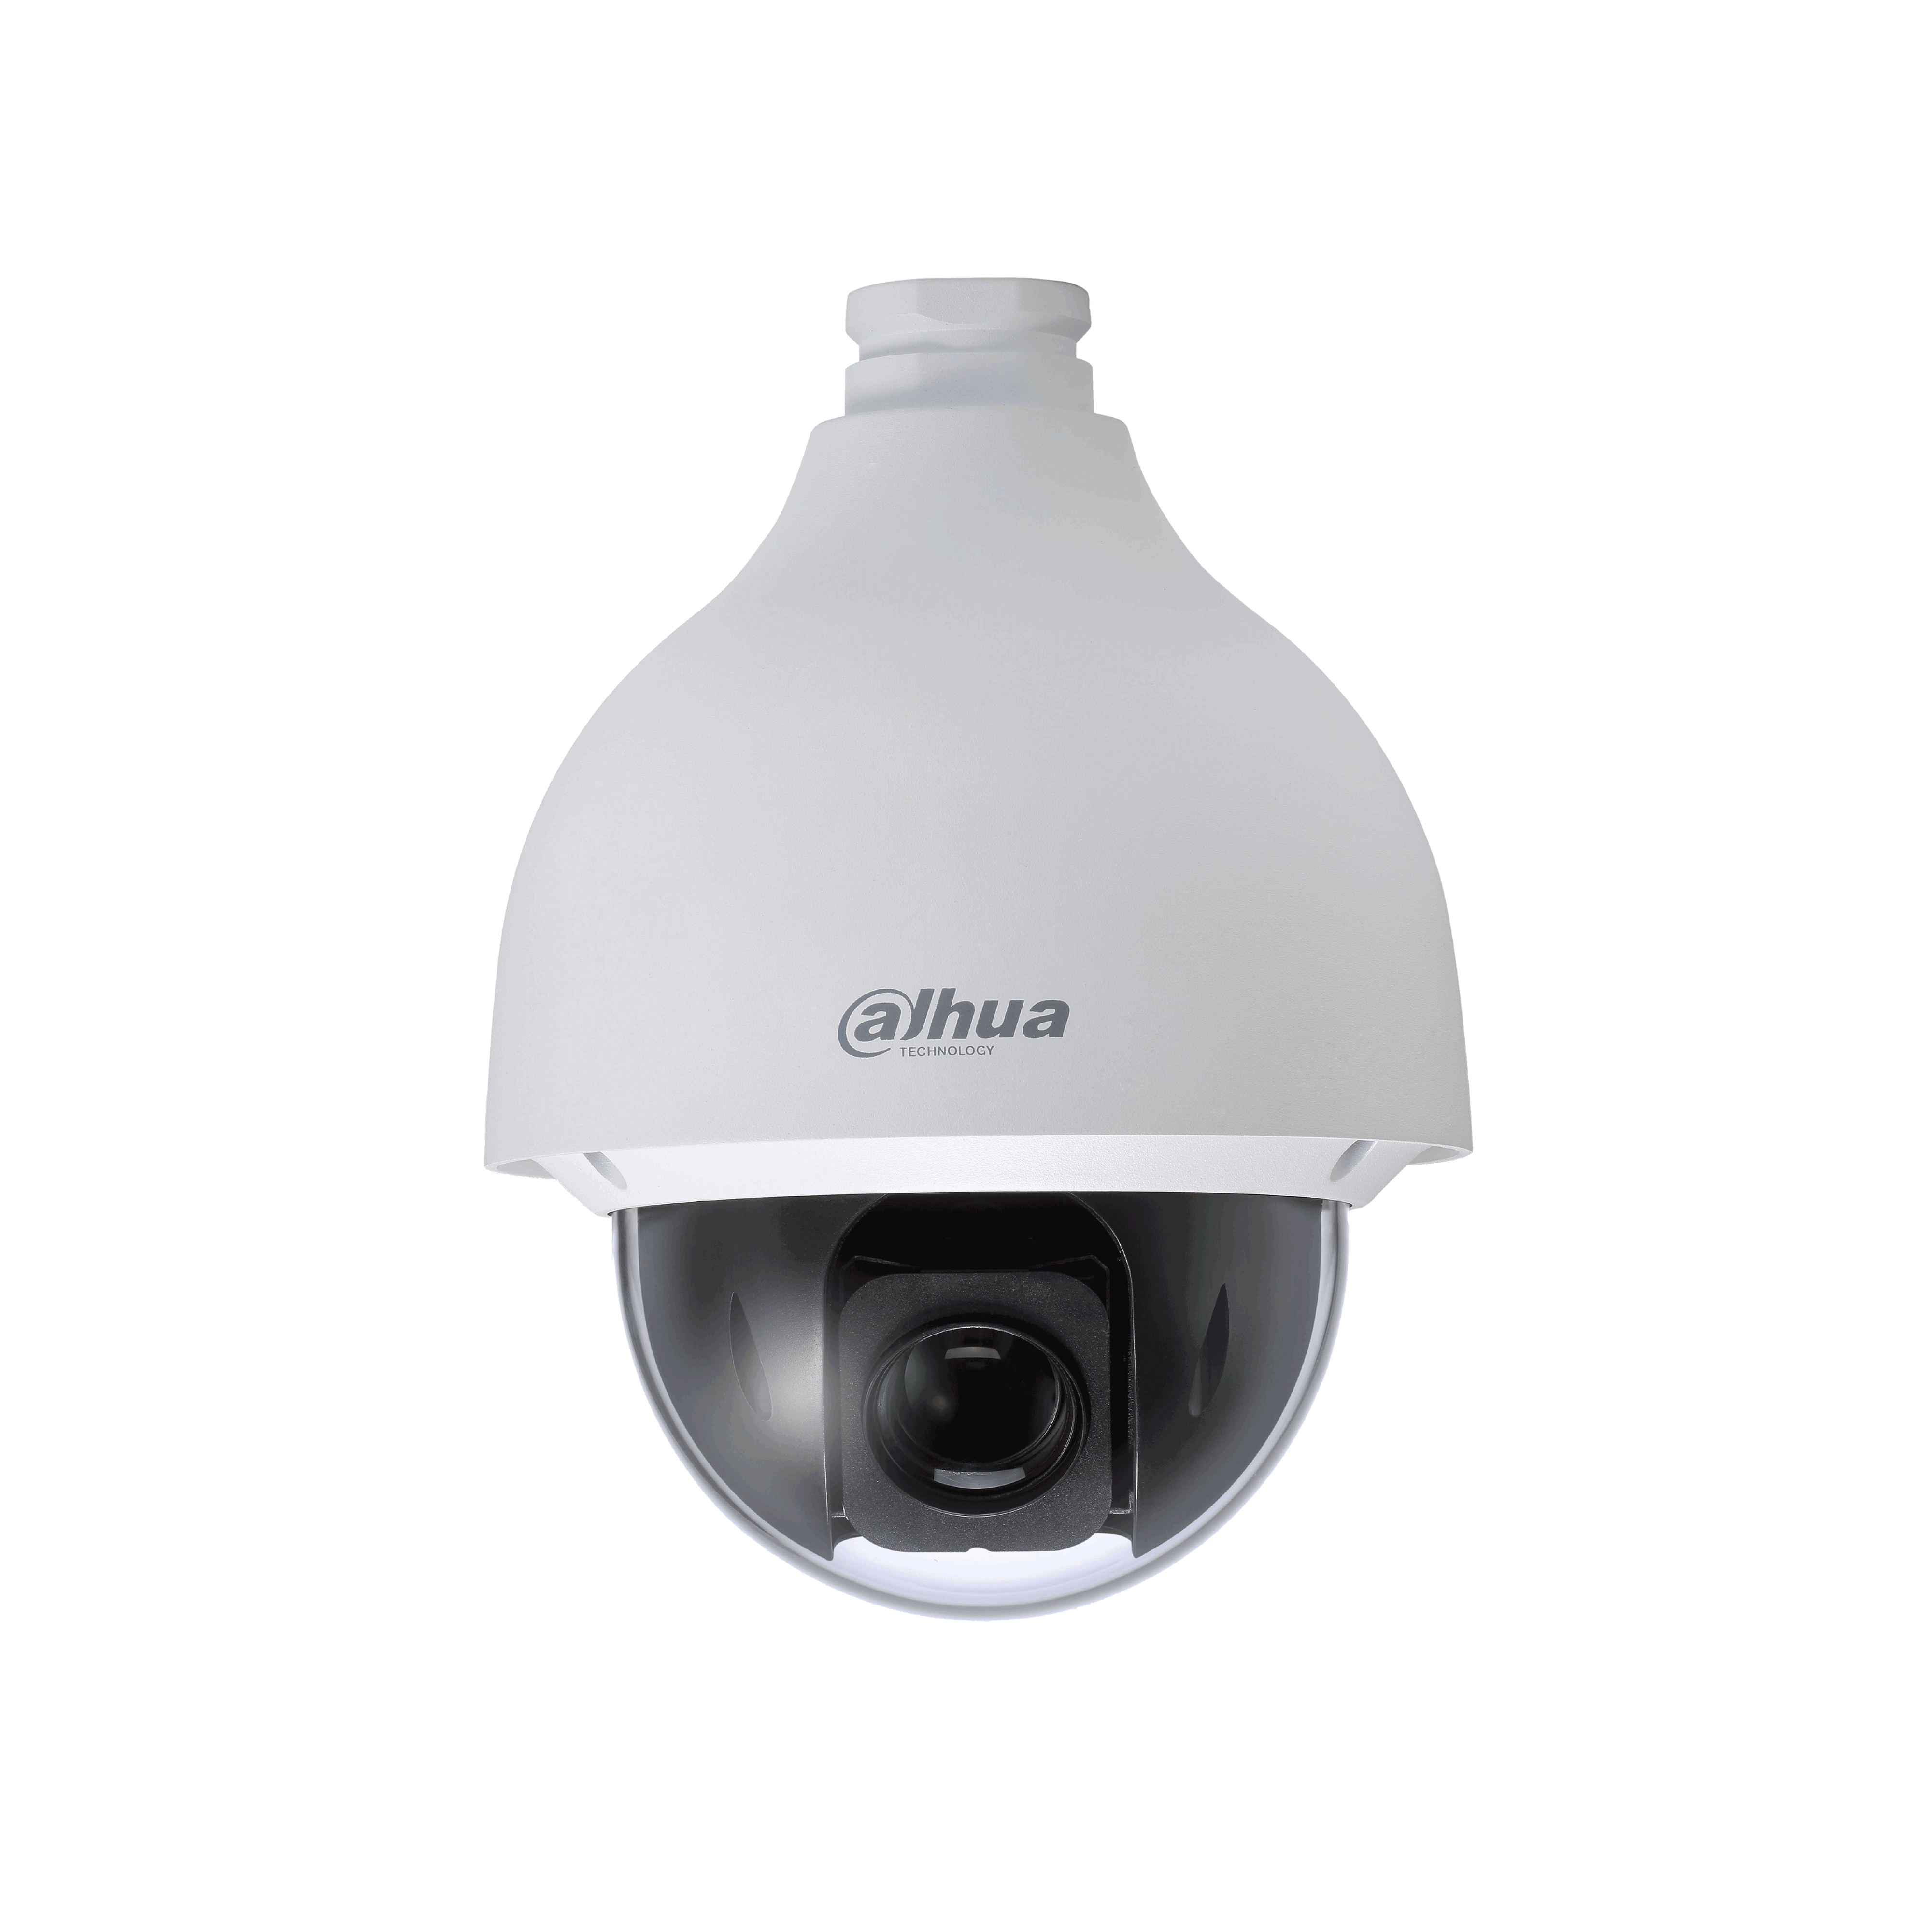 WIZSENSE SERIES IP CAMERA WHITE AI AUTO TRACKING 4MP H.264/4+/5/5+ SPEED DOME PTZ 120 WDR METAL 4.8-154MMMOTORISED LENS 32X ZOOM STARLIGHT POE+ IP67 WITHOUT MIC AUDIO IN AUDIO OUT 2 x ALARM IN 1 x ALARM OUT SUPPORT UP TO 512GB SDIK10 24VDC